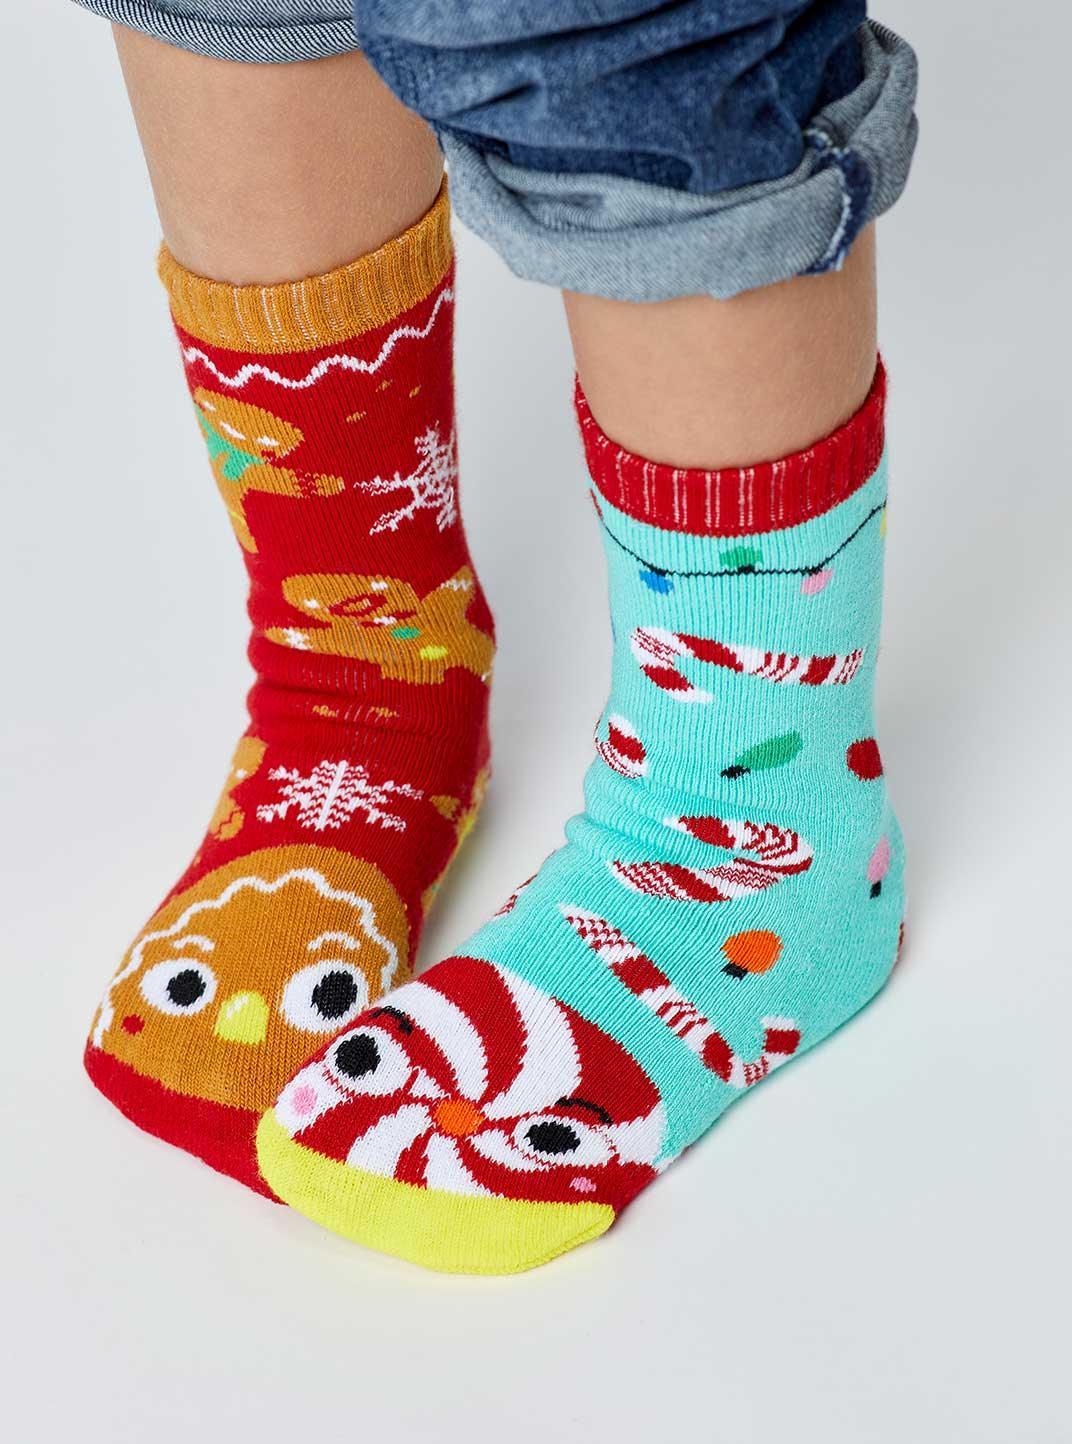 Christmas! Gingerbread & Candy Cane | Mismatched Socks - Pals Socks - The Sock Monster